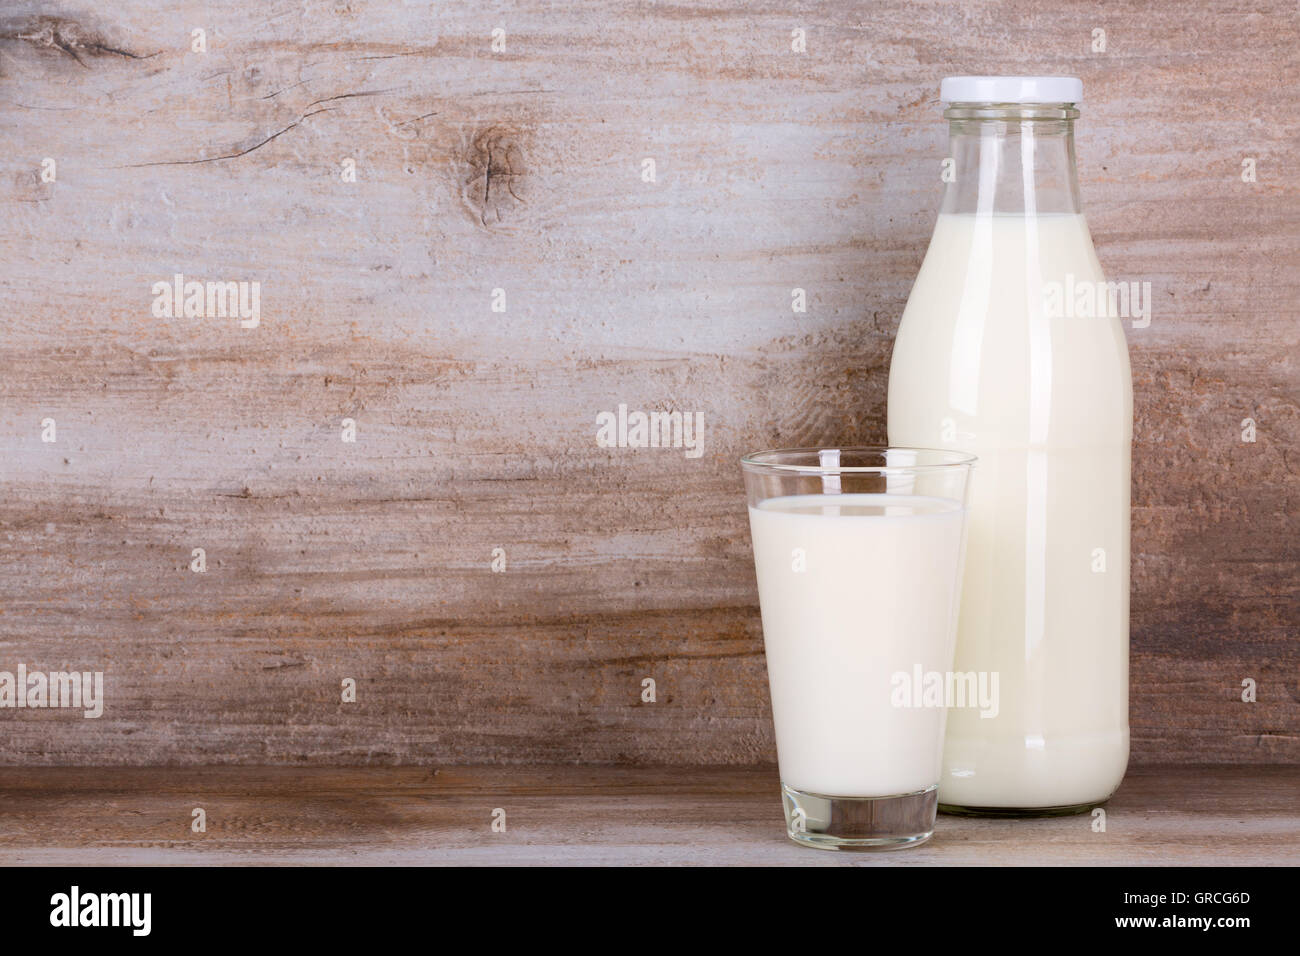 bottle and glass of milk on wooden background Stock Photo